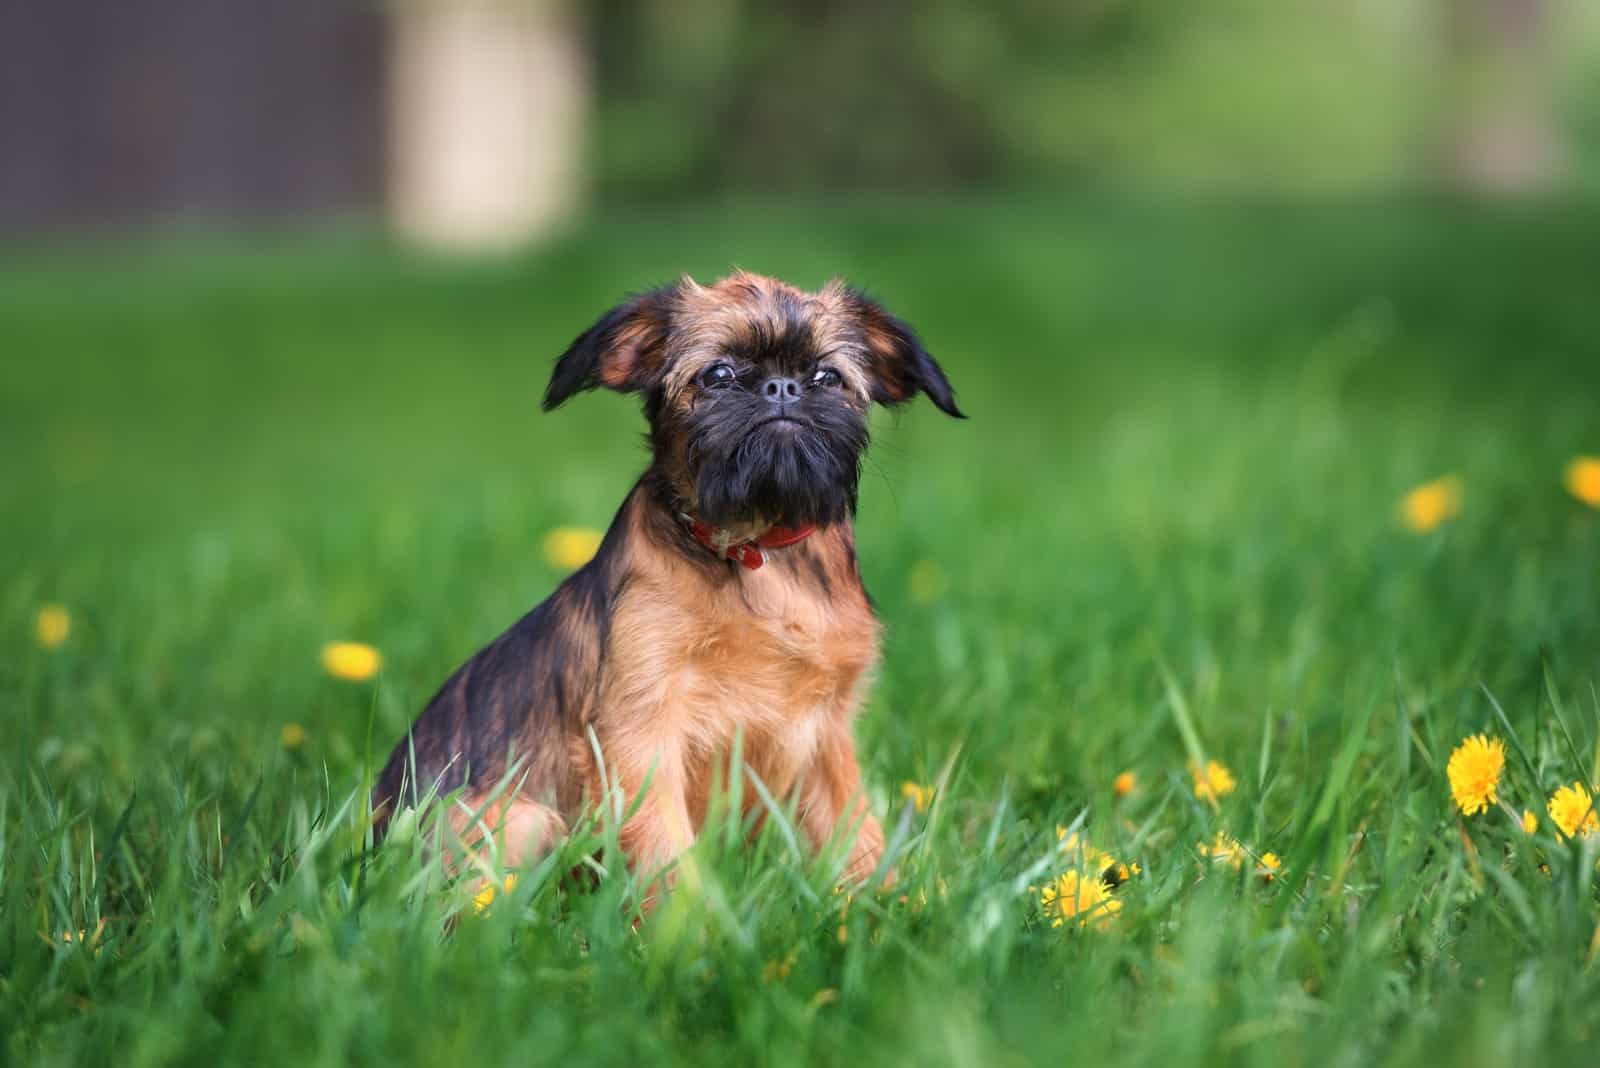 brussels griffon puppy posing outdoors in summer